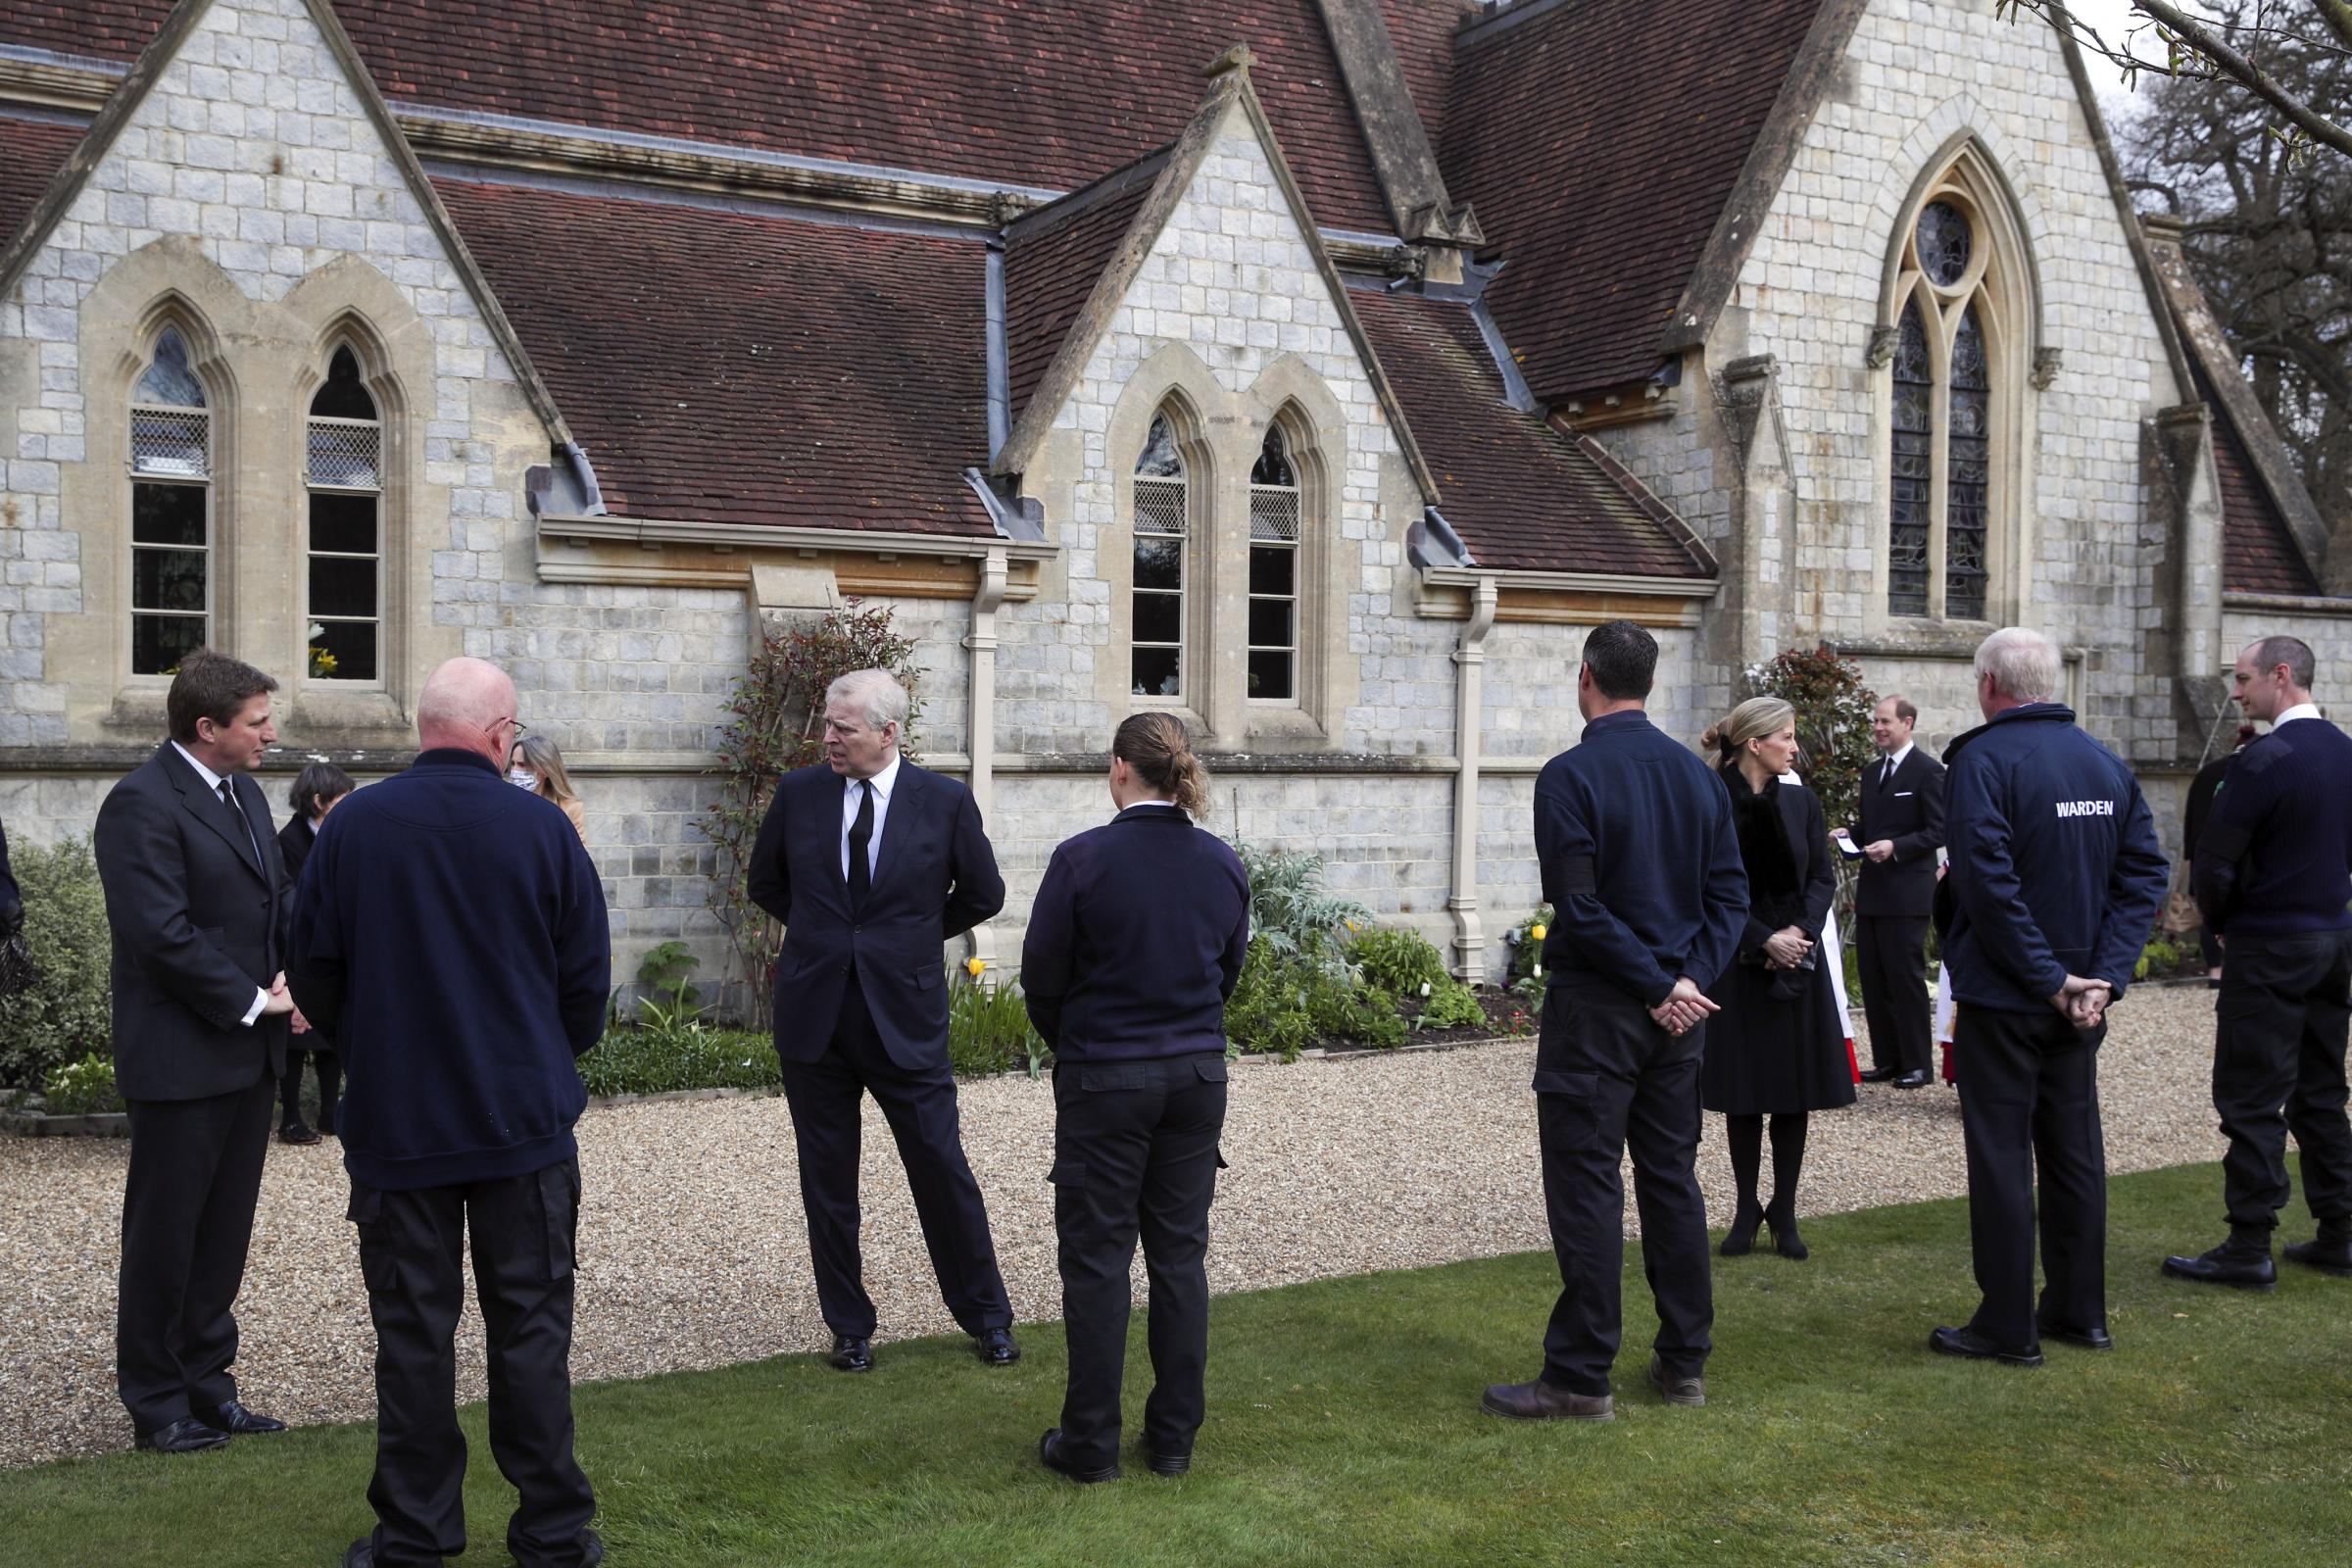 The Duke of York (third left) and the Countess of Wessex talk with Crown Estate staff as they attend the Sunday service at the Royal Chapel of All Saints at Royal Lodge, Windsor, following the announcement on Friday April 9, of the death of the Duke of